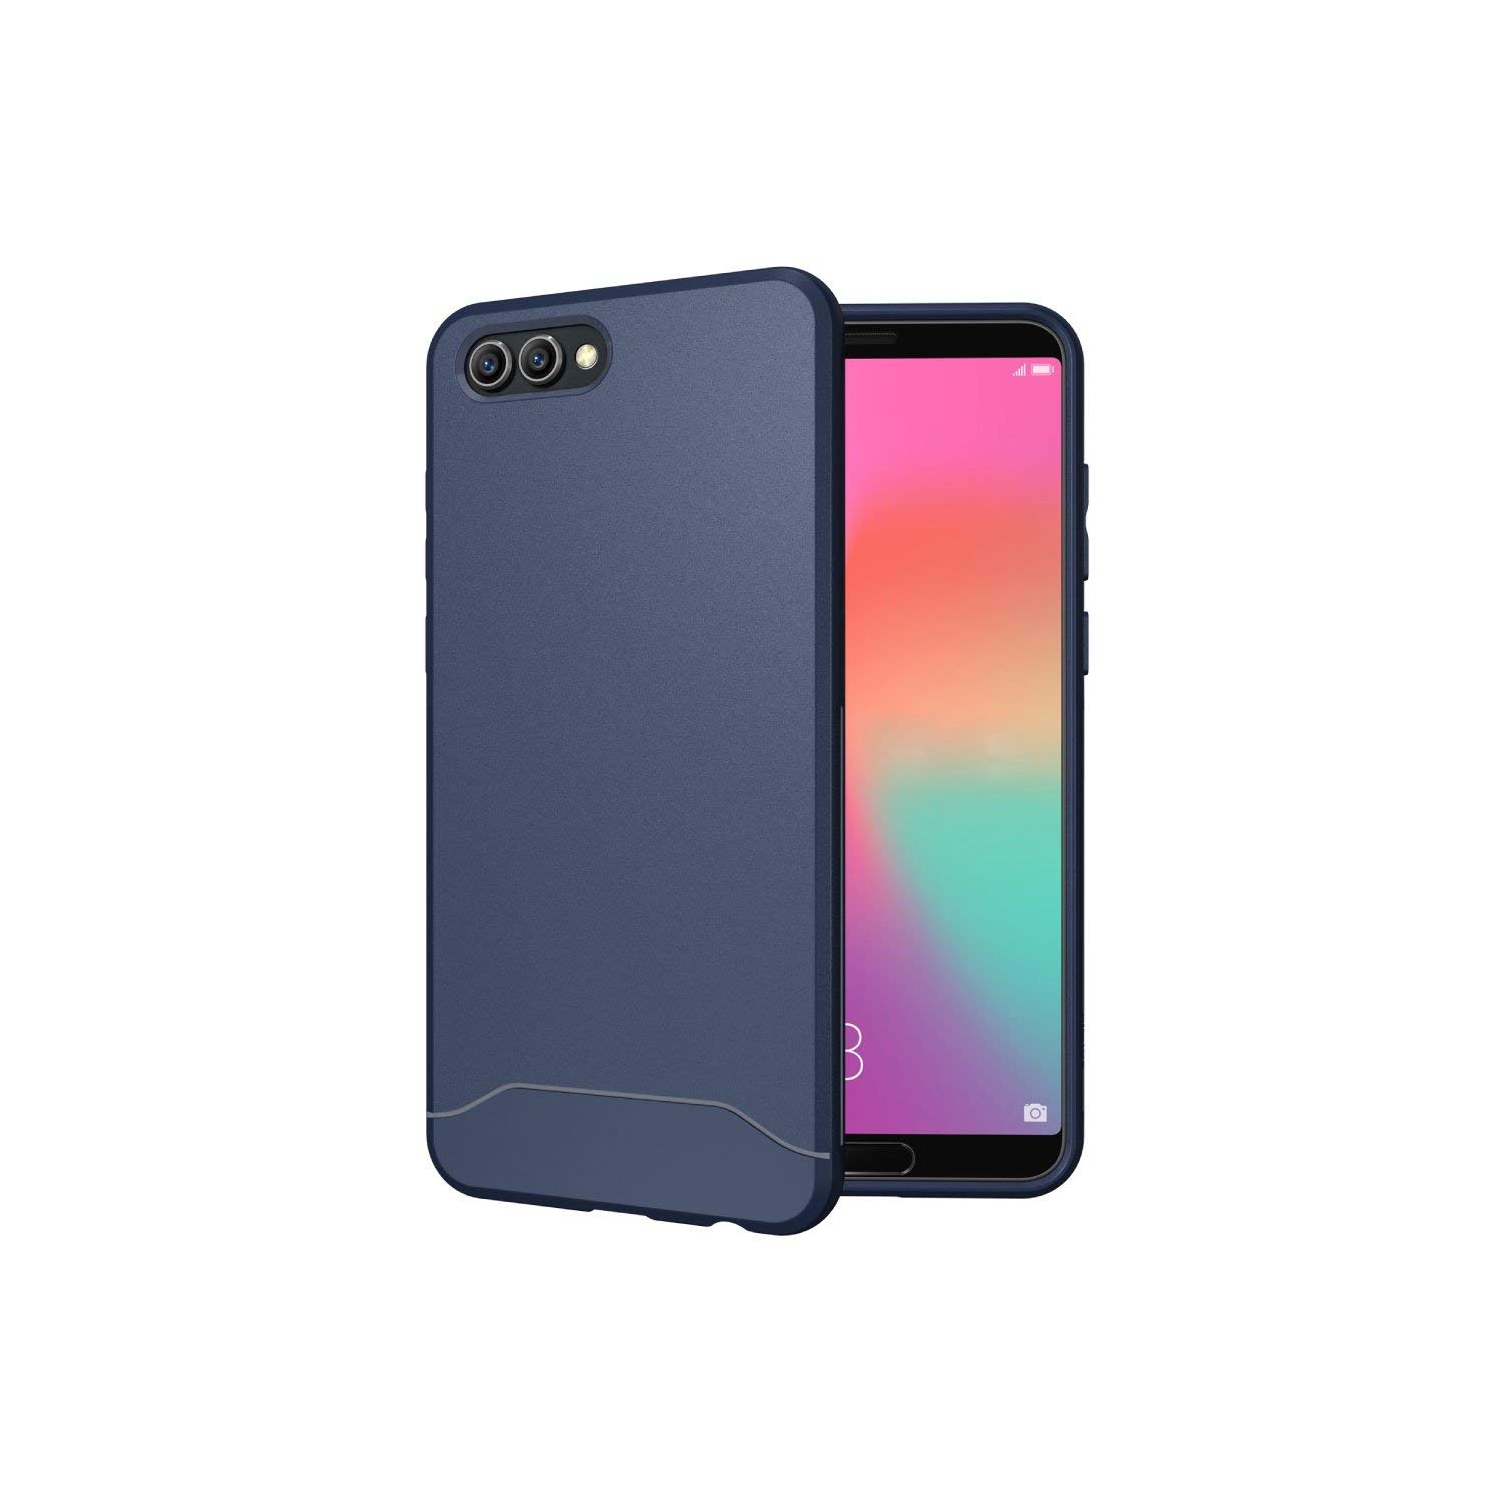 Honor View 10 Case, TUDIA Full-Matte Lightweight [Arch S] TPU Bumper Shock Absorption Cover for Huawei Honor View 10 (Navy Blu